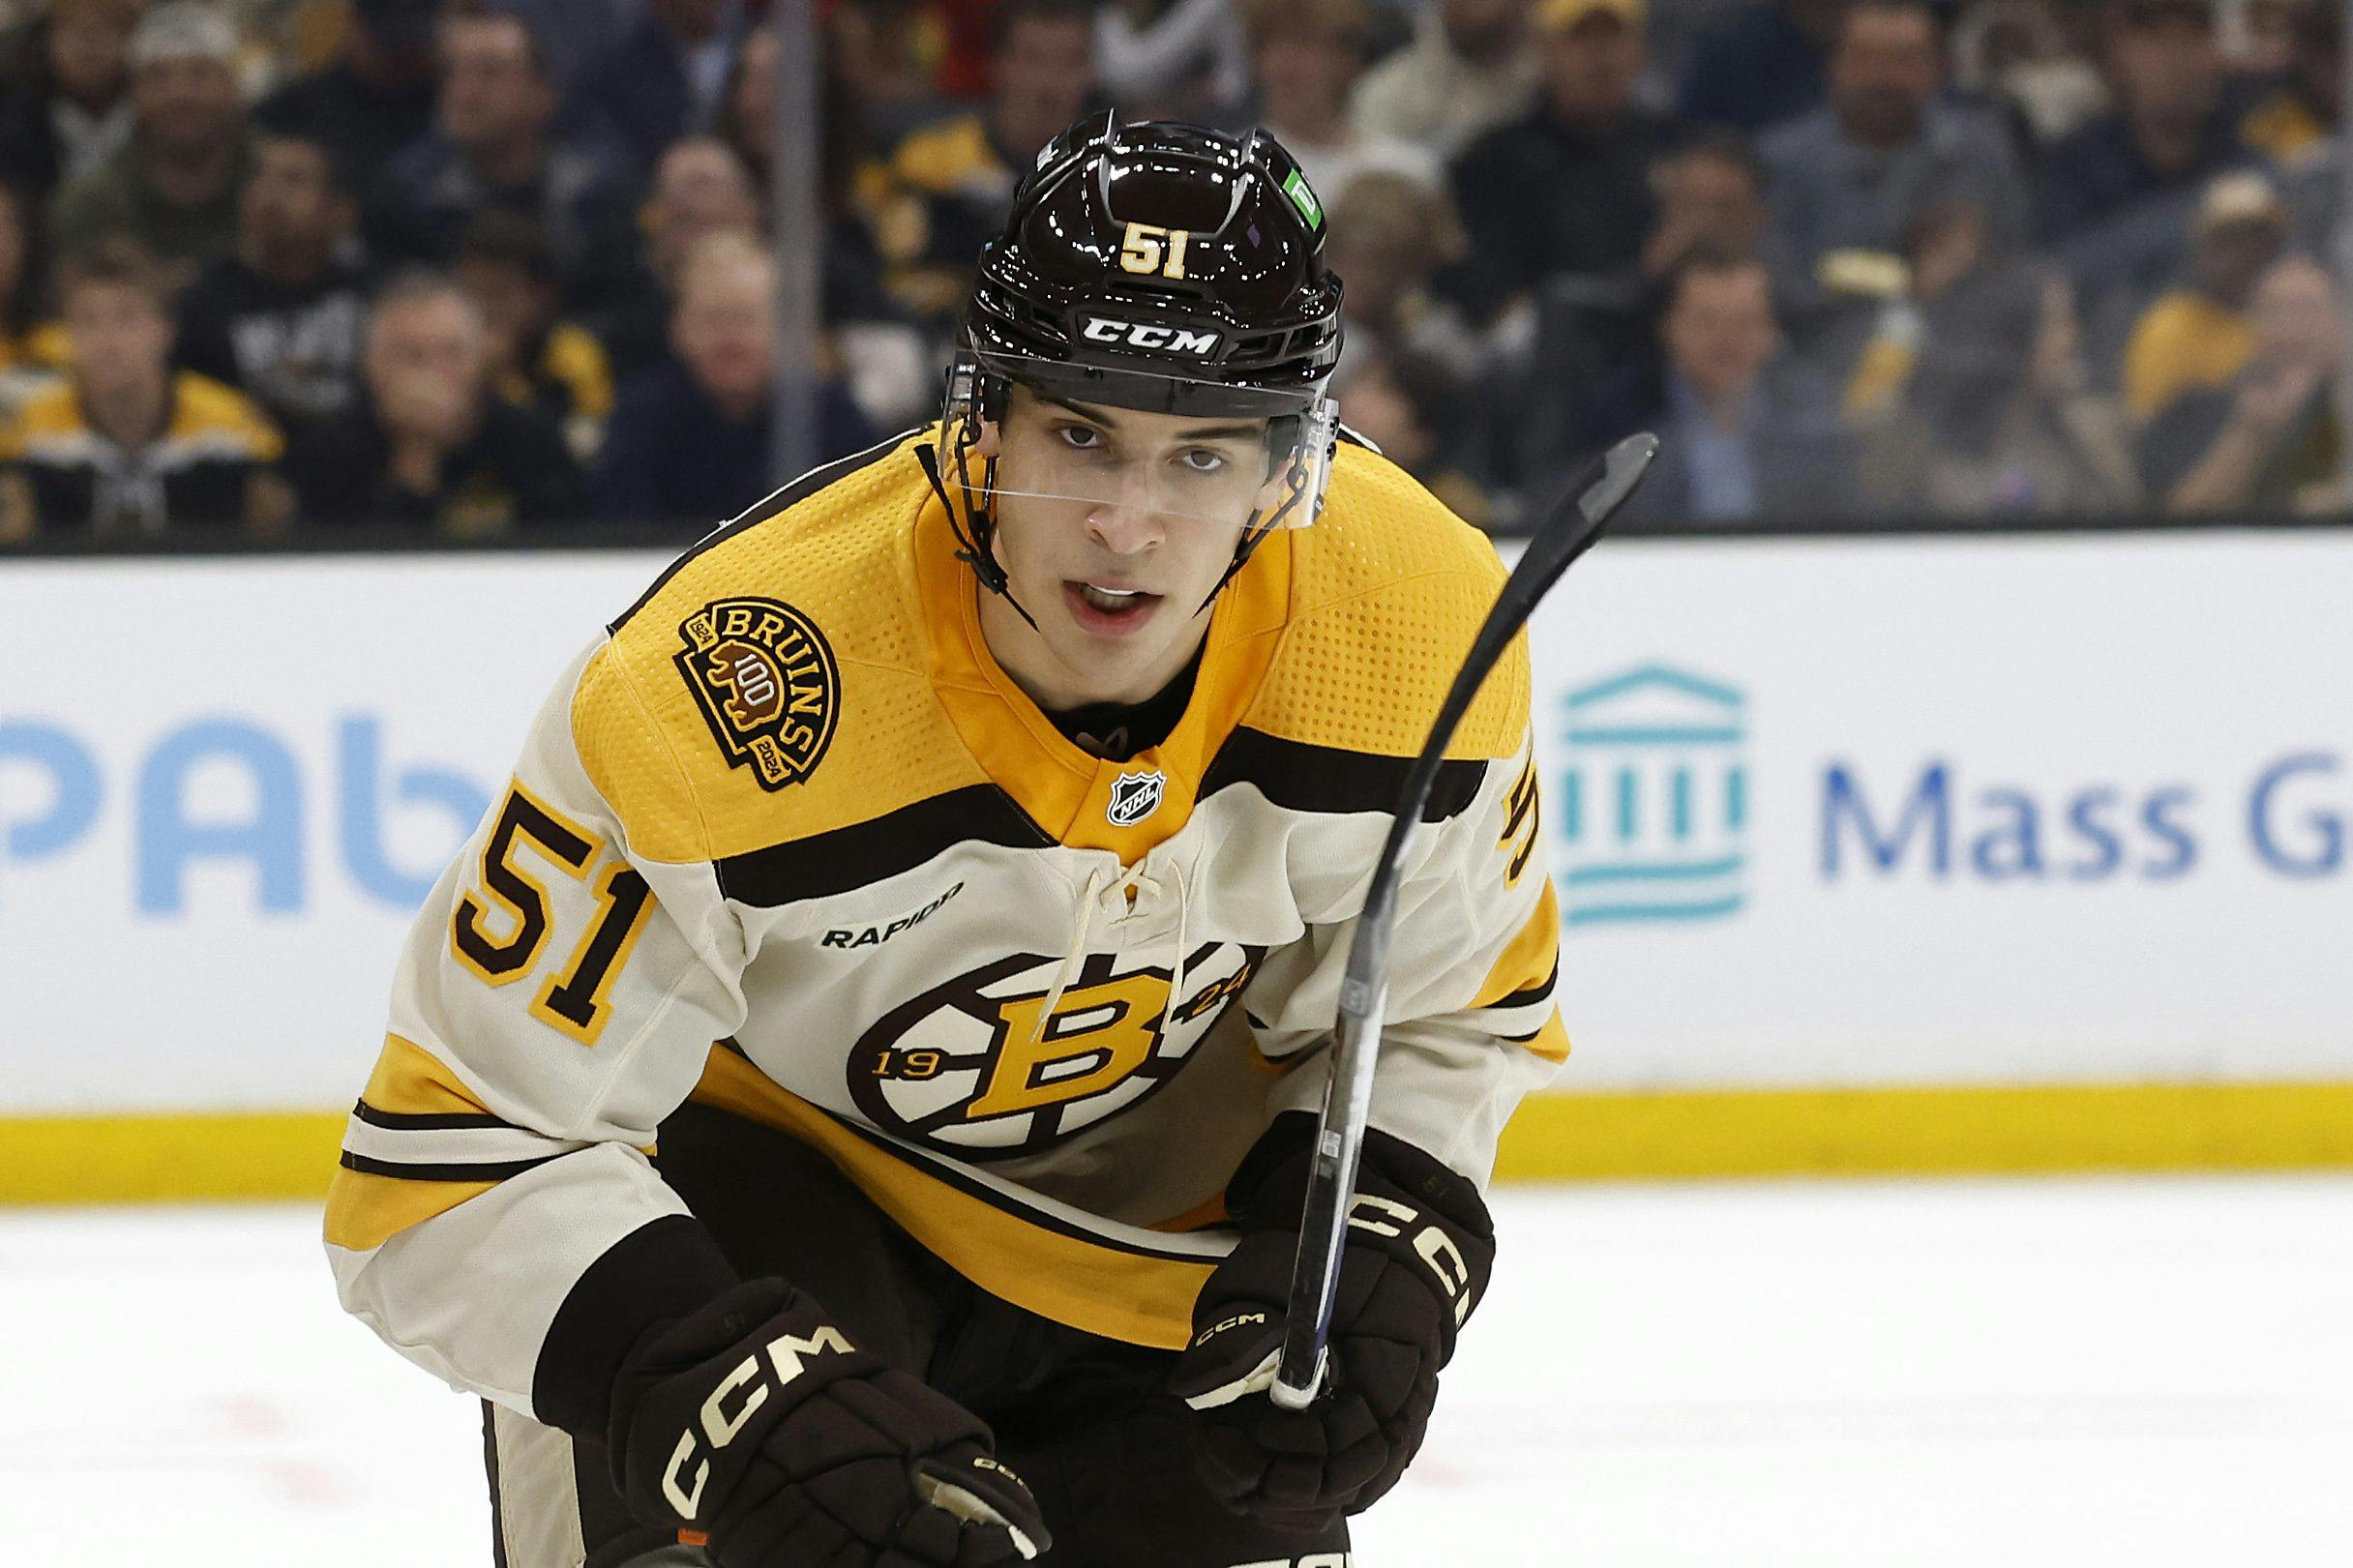 Matthew Poitras has been a surprise breakout for the Boston Bruins